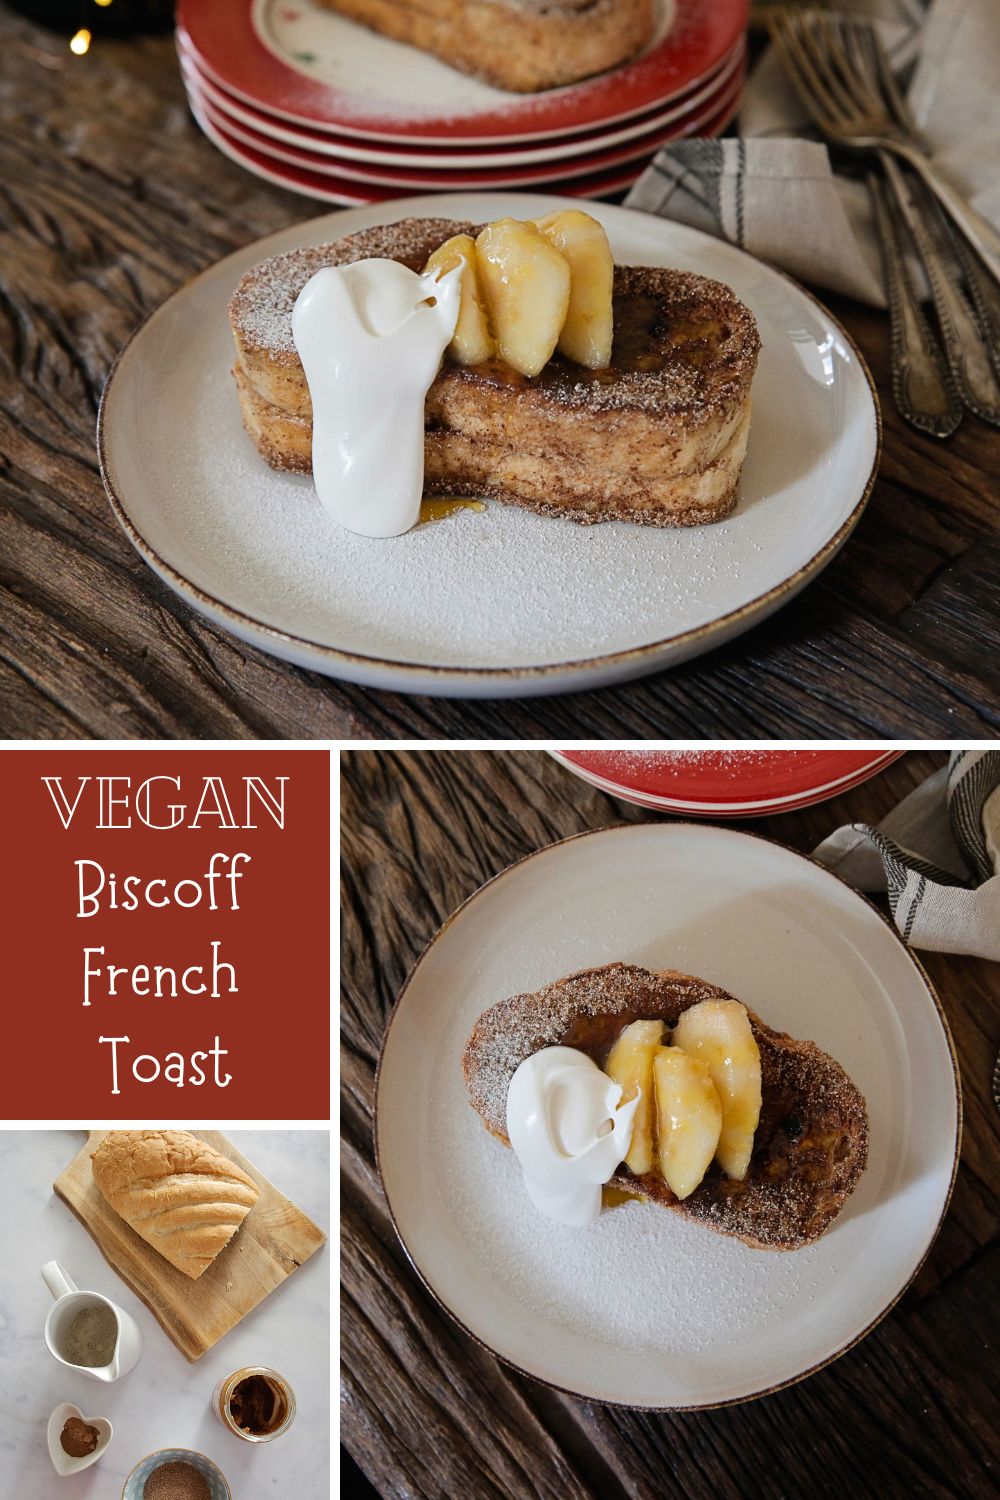 With its crispy exterior, and irresistible filling, this vegan Biscoff Stuffed French Toast is the perfect way to start the day. A decadent breakfast the whole family will love! Recipe on thecookandhim.com #biscoff #frenchtoast #veganfrenchtoast #veganbreakfast #veganchristmas